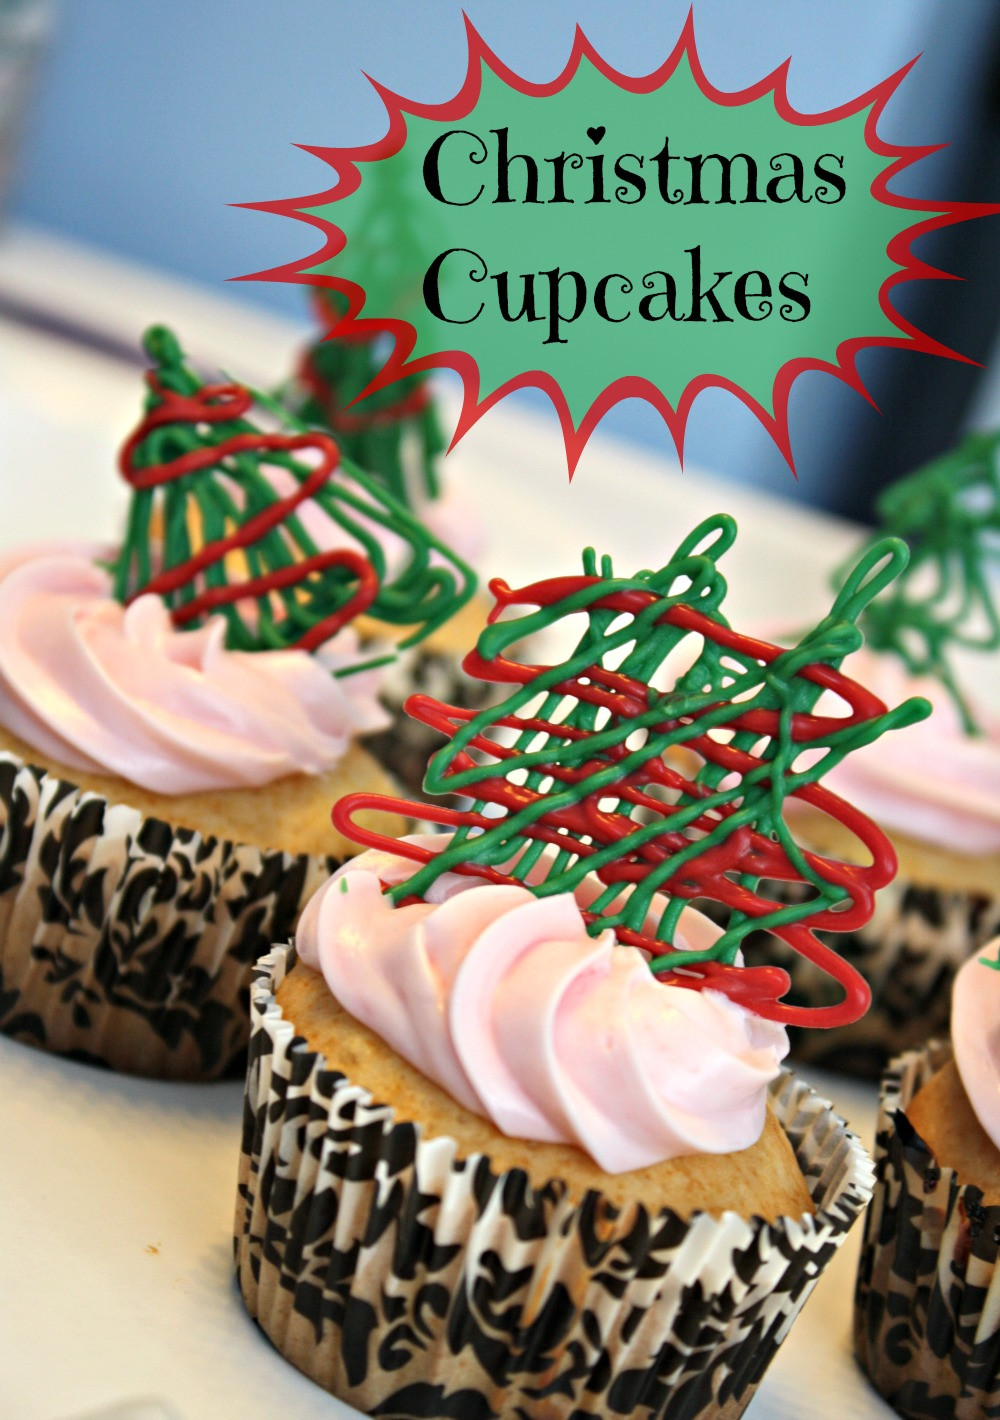 Easy Christmas Cupcakes Recipe
 Easy Christmas Cupcakes with Drizzled Chocolate Recipe